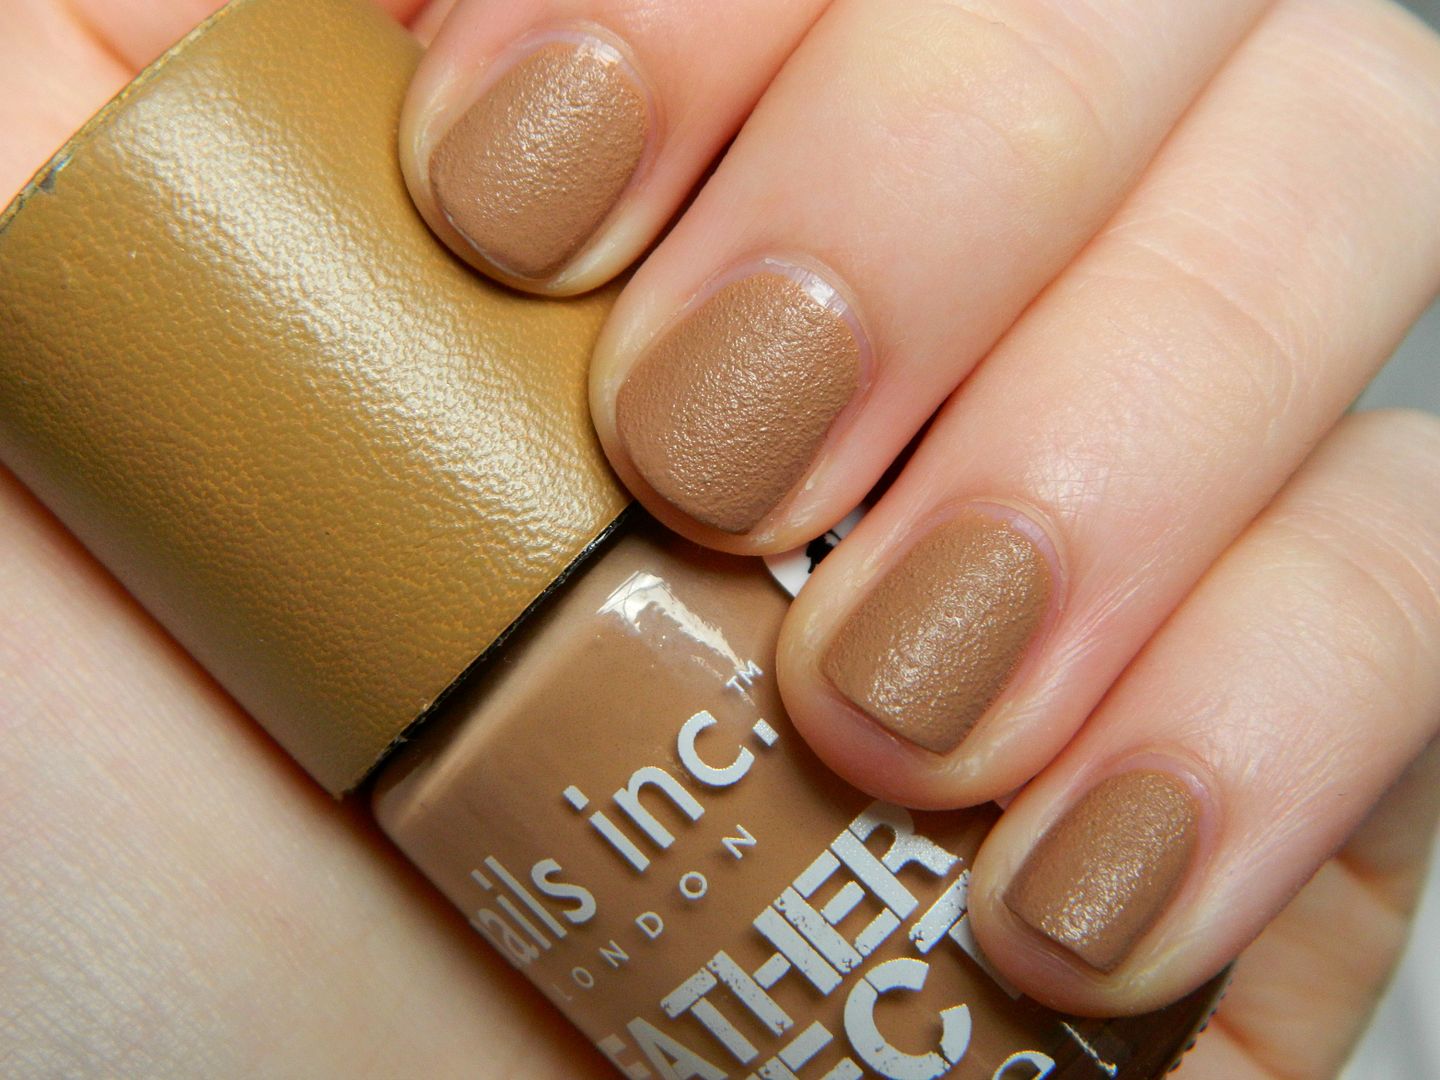 Nails Of The Day Nails Inc Leather Effect Soho Mews Nail Polish Swatch Review Belle-amie